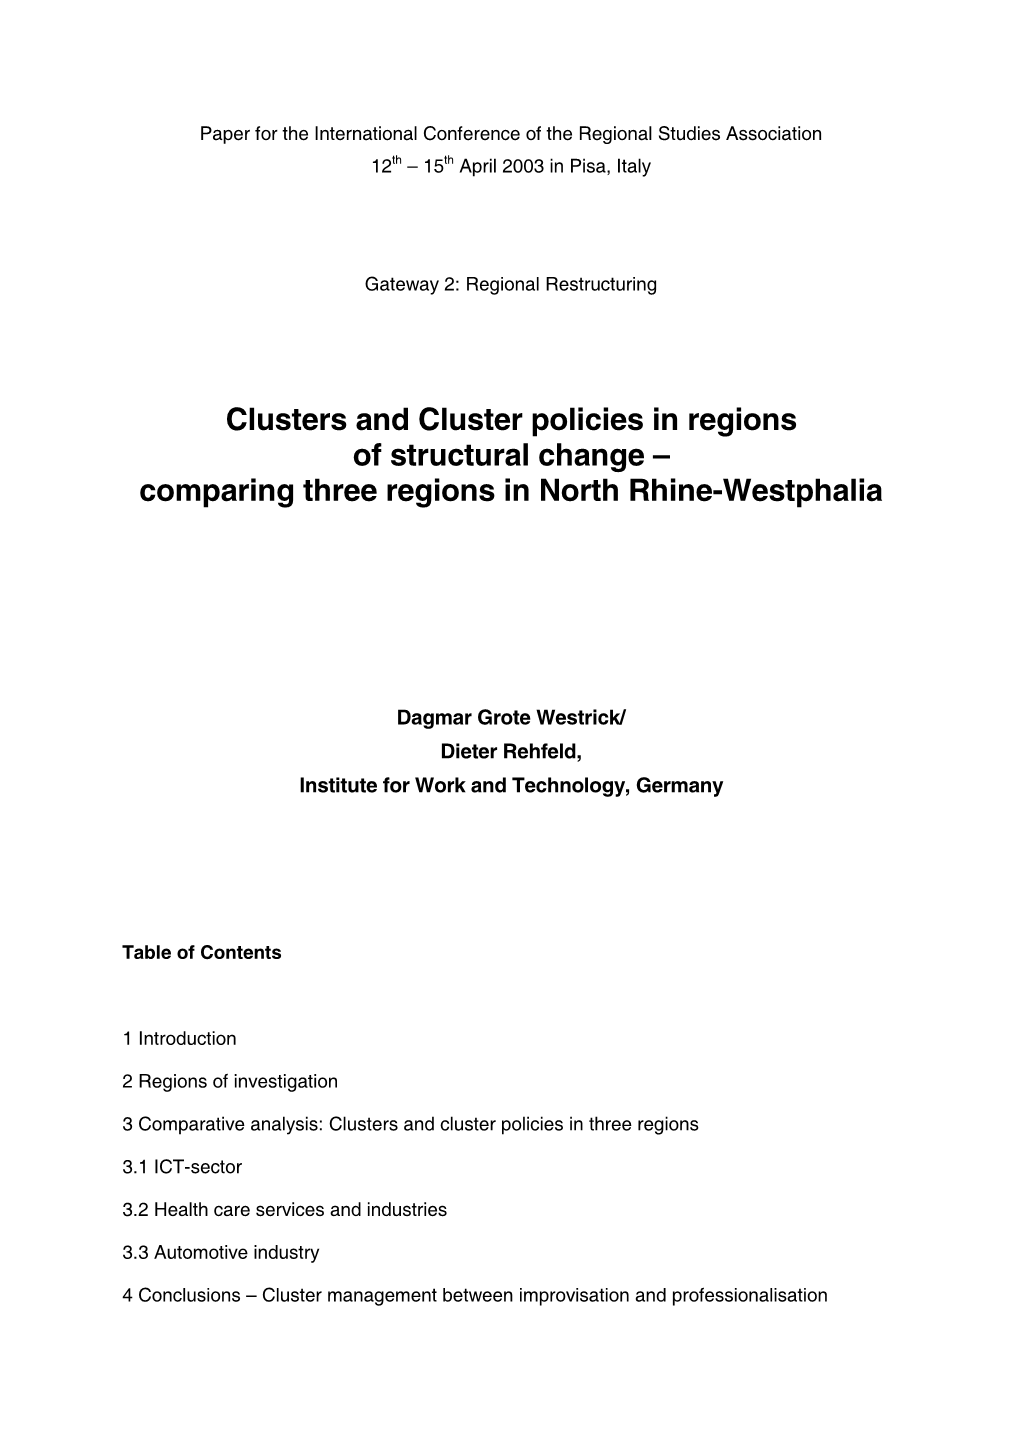 Clusters and Cluster Policies in Regions of Structural Change – Comparing Three Regions in North Rhine-Westphalia